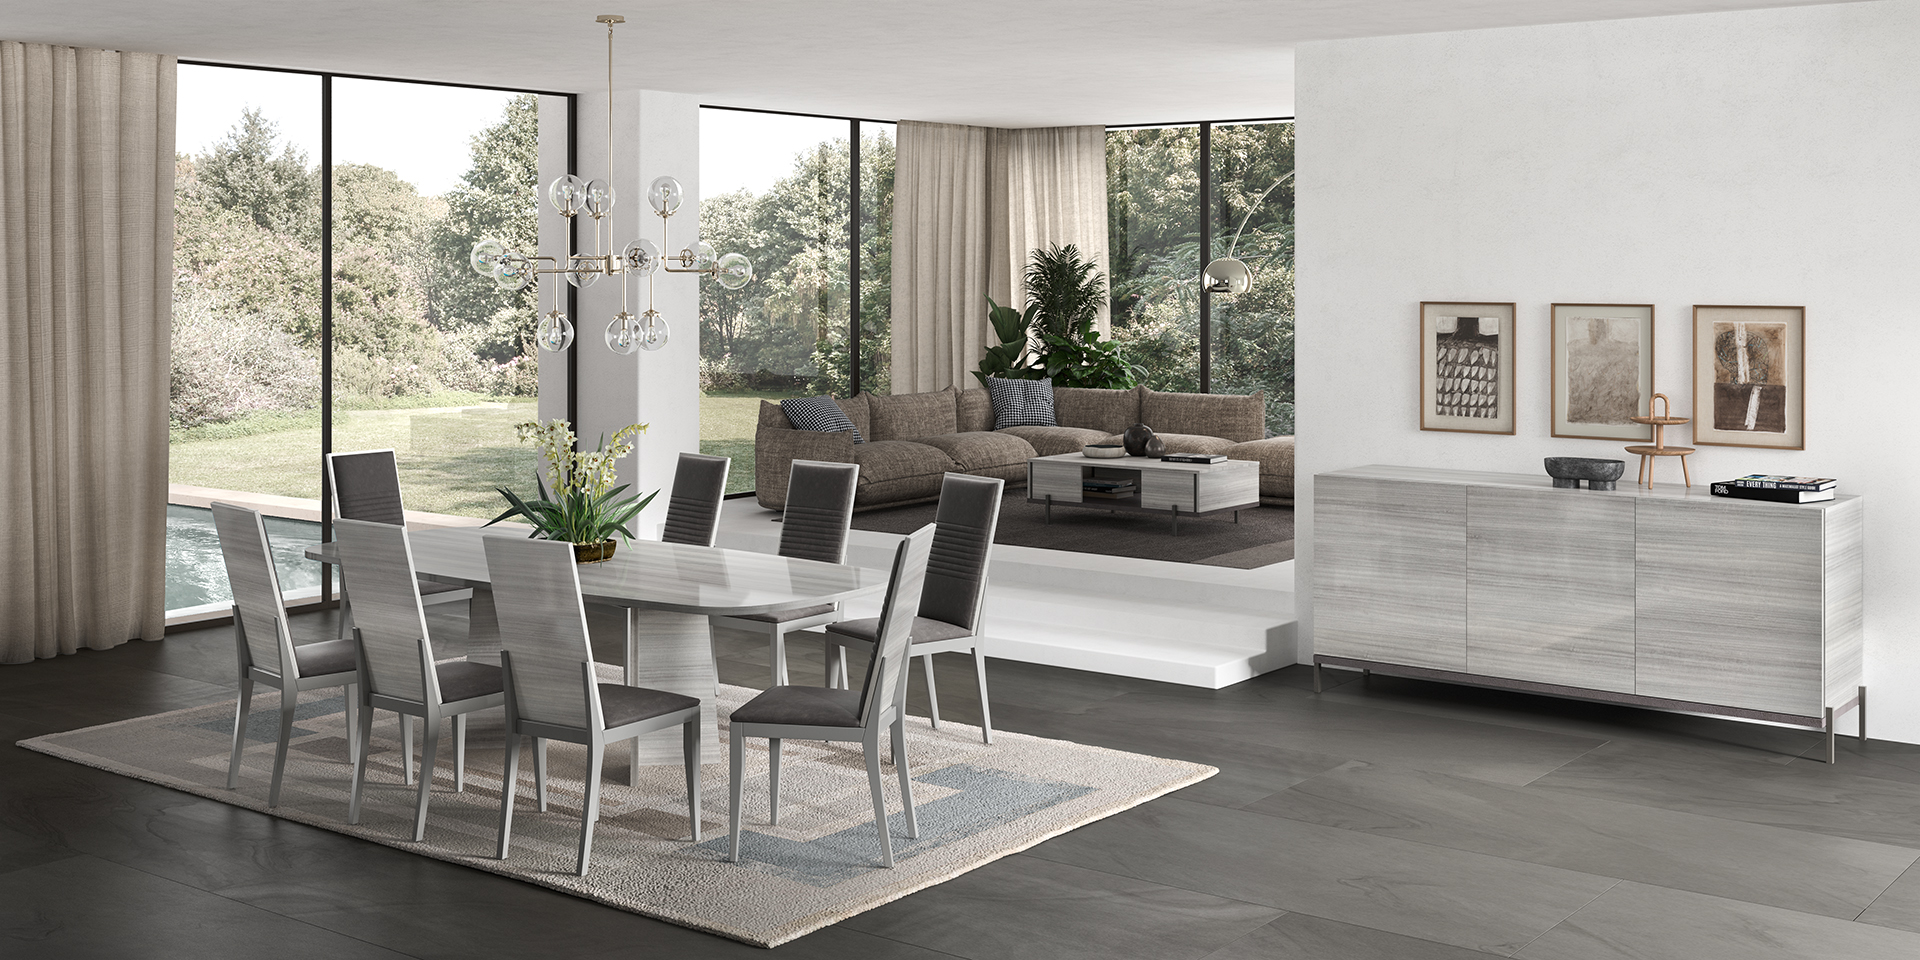 Brands Status Modern Collections, Italy Mia Dining room Additional items